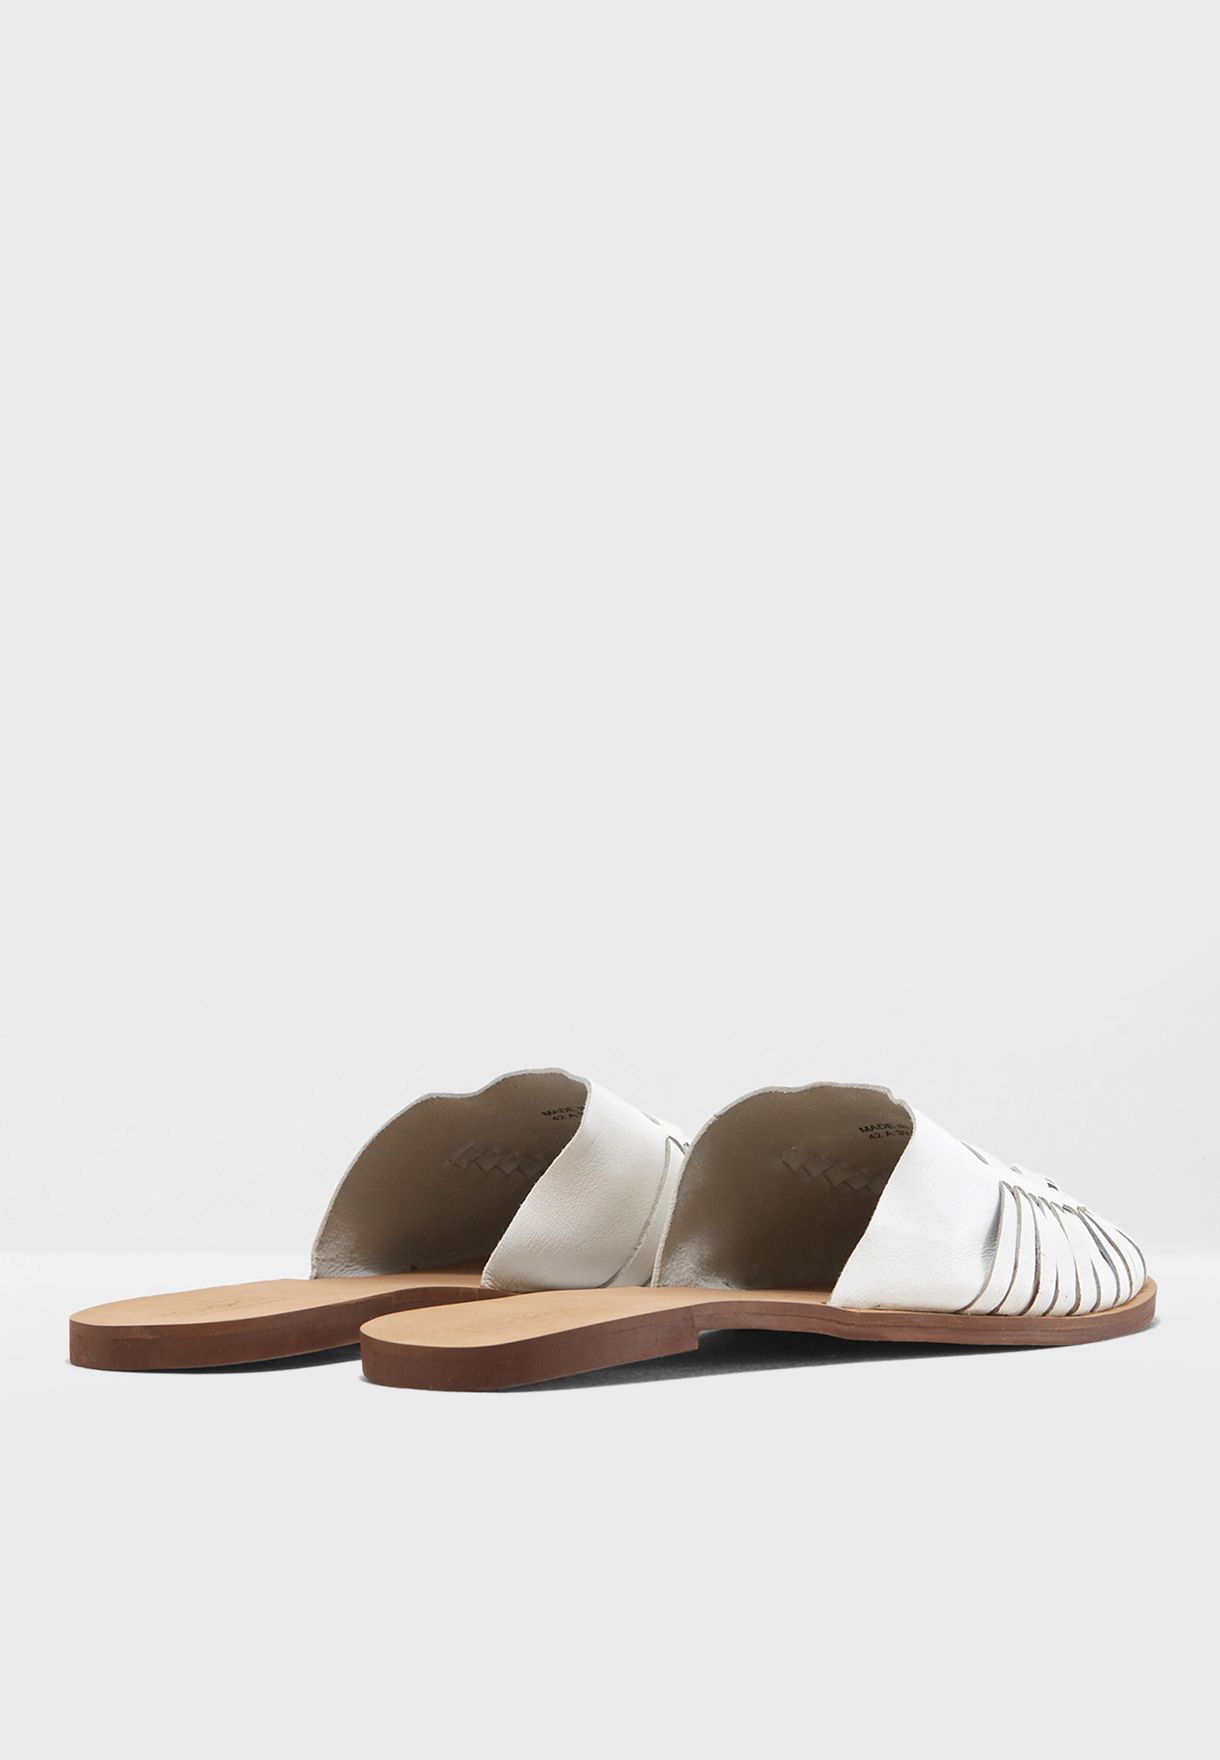 topshop woven mules